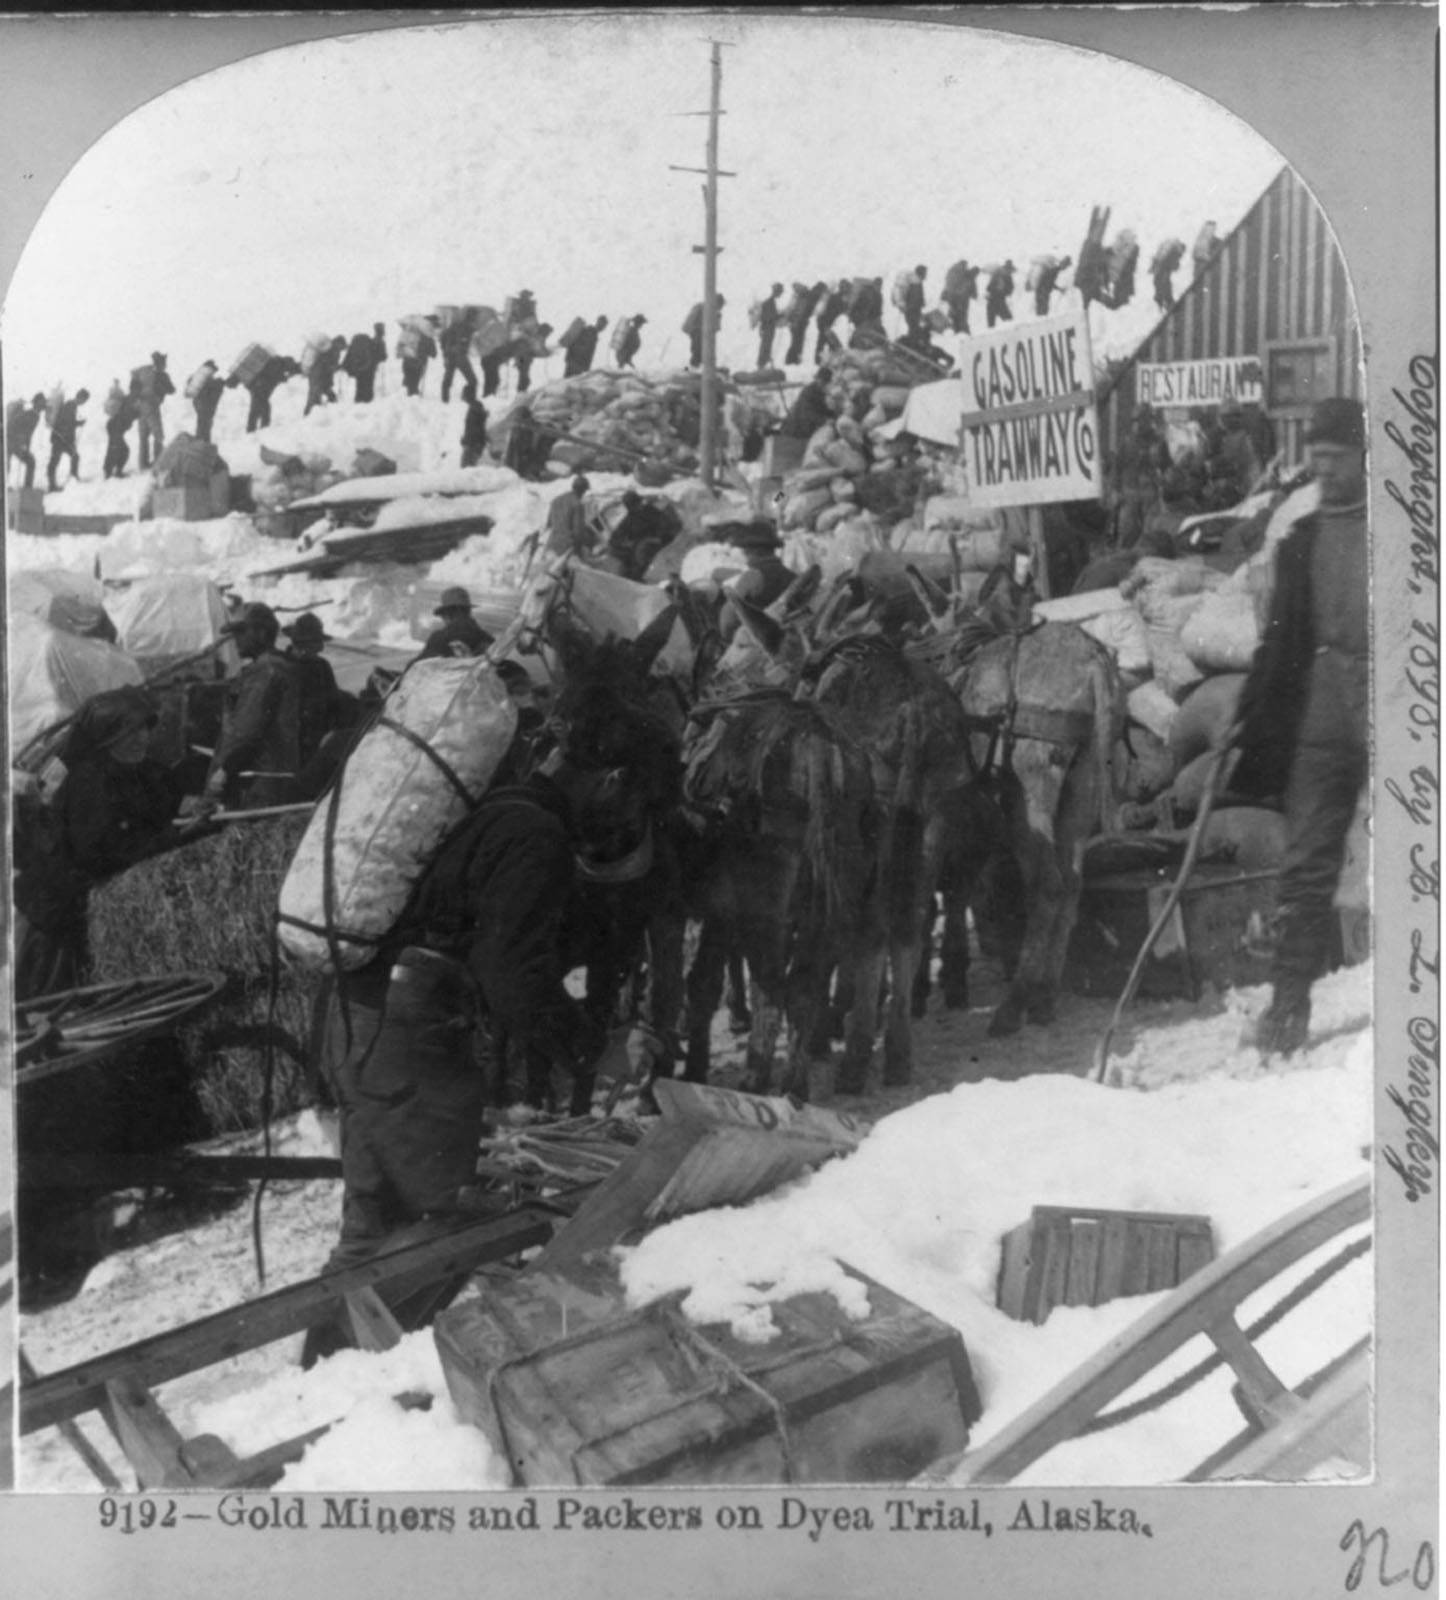 Library of Congress, 3b12801; KLGO Digital Library “Gold Miners and Packers on Dyea Trail, Alaska” looking west, most likely taken winter of 1898. Photographer: B. L. Singley (Keystone View Company) This photograph shows the Gasoline Tramway Company sign amid stampeders, horses, and outfits. The gasoline powered tramway was introduced by mid-April 1898. It was described as “simply a pulley drum and gasoline engine at the summit of the pass, and enough rope to reach the bottom. Sleds were hitched onto the rope, which was wound around the drum and it pulled them to the top.” In the background is the line of stampeders hiking on the Golden Stairs